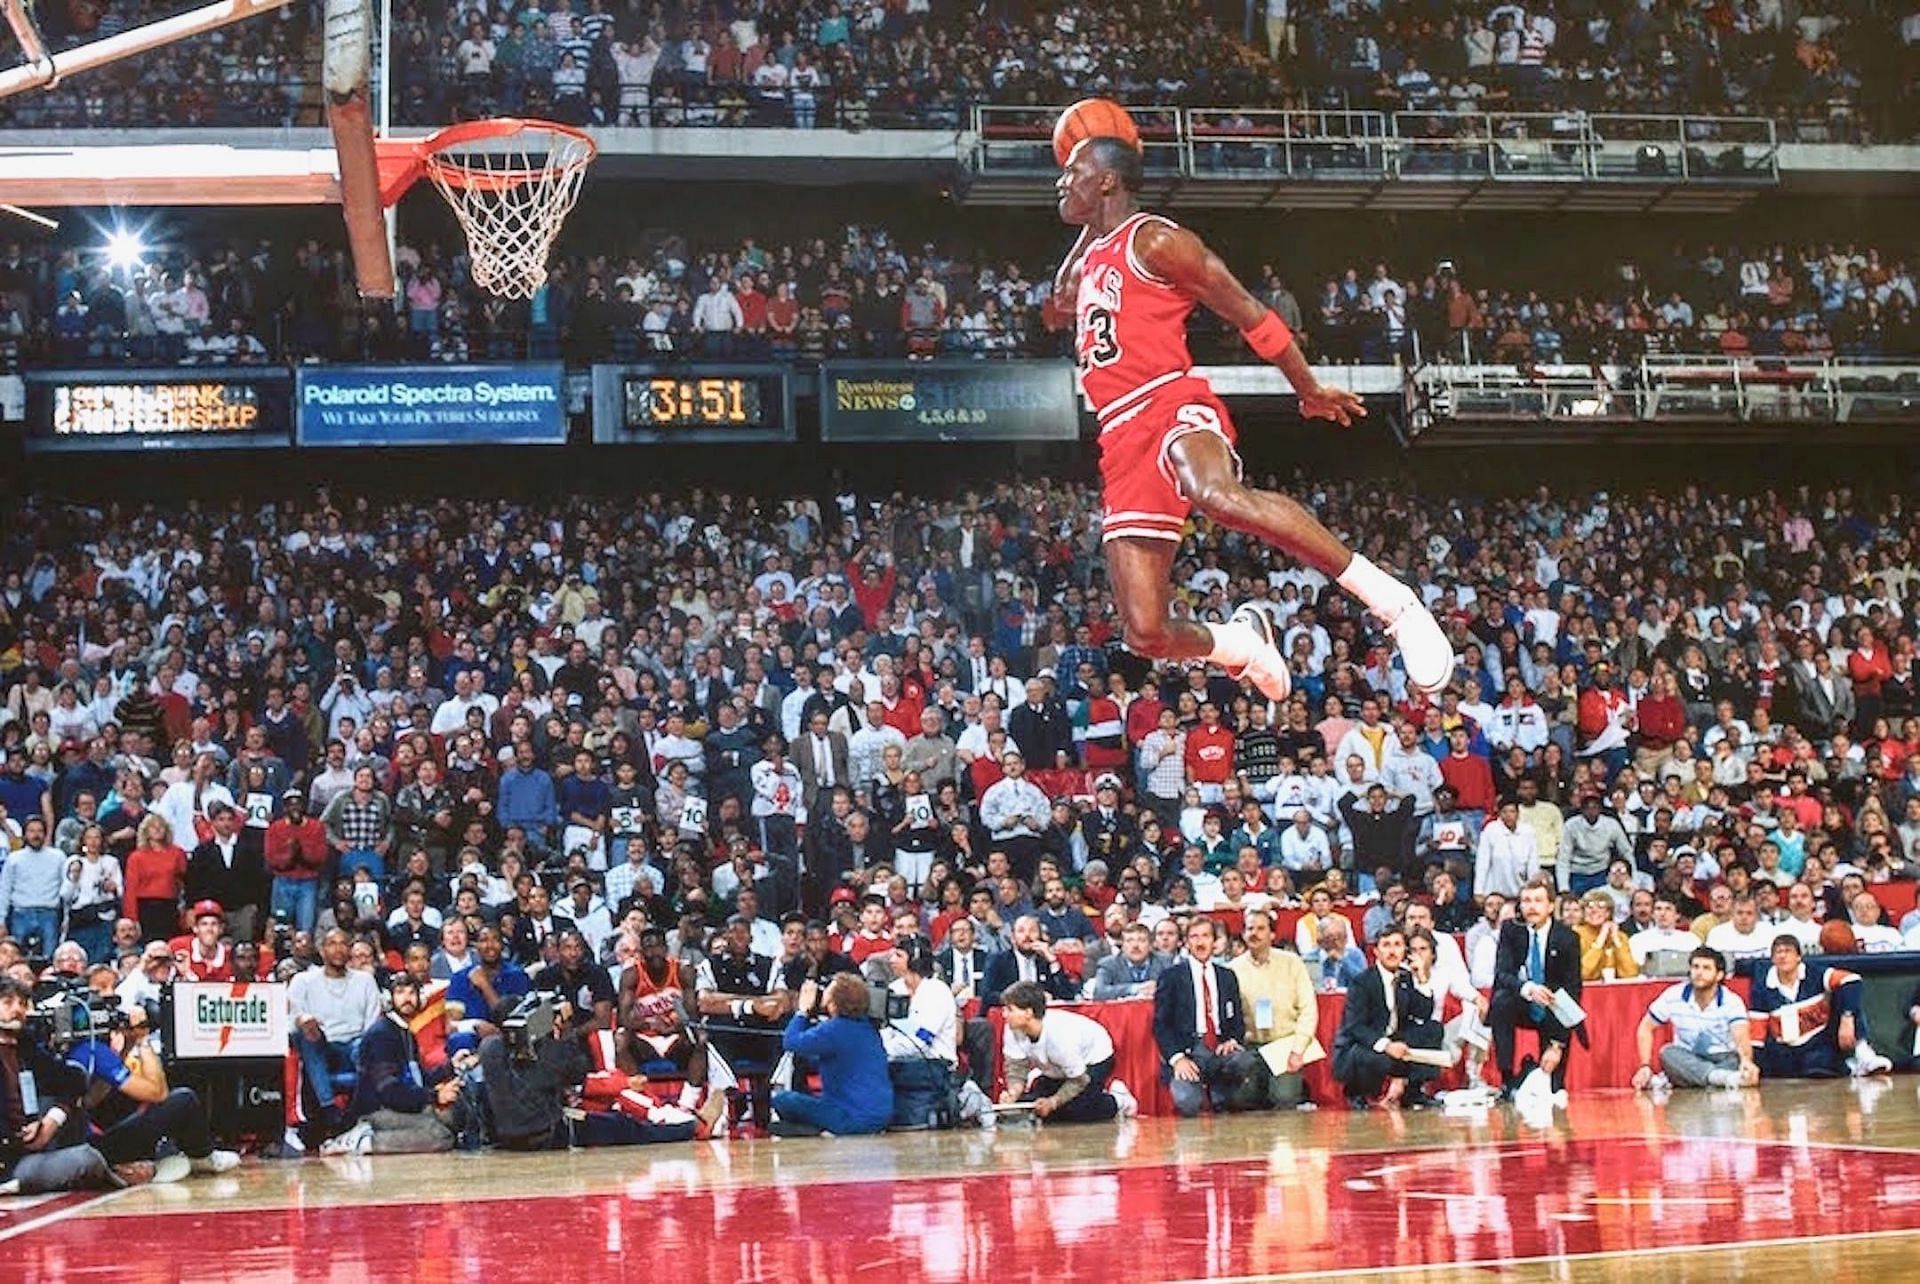 Watch: Throwback to when Michael Jordan dominated the dunk contest, including his iconic slam from the free-throw 35 years today